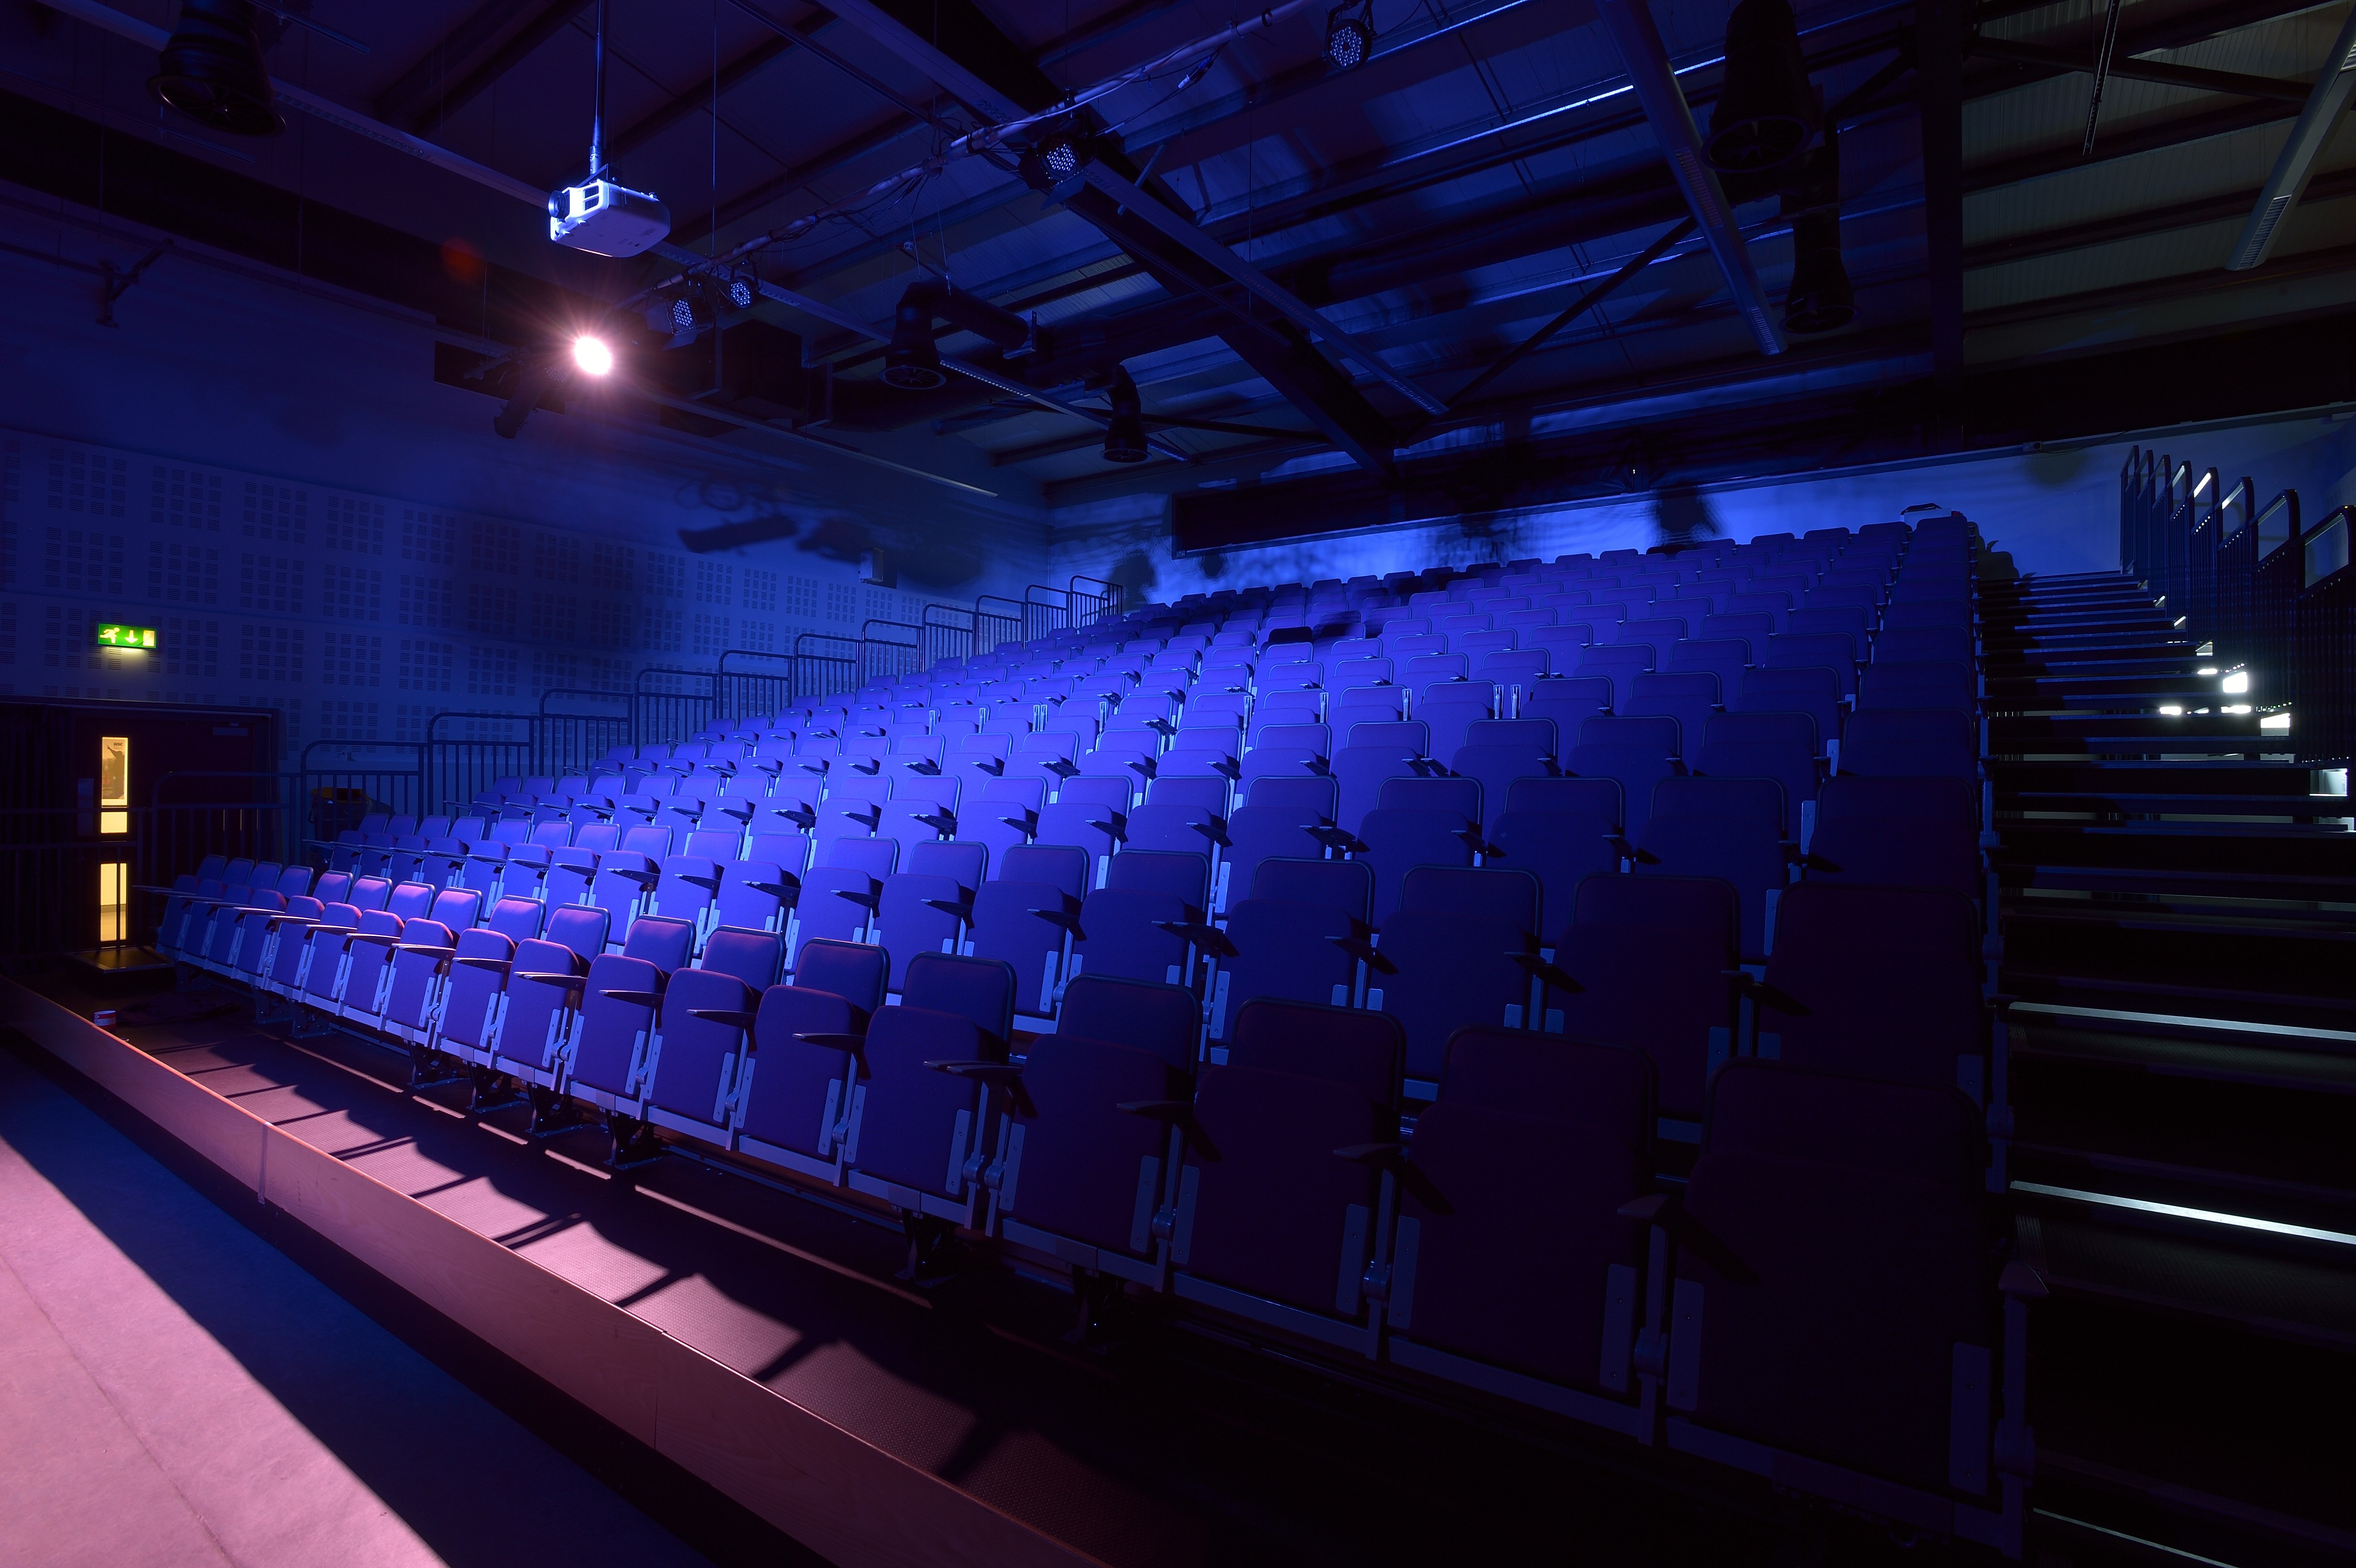 From the University of Bolton Performing Arts department, the Queens Theatre Seating 